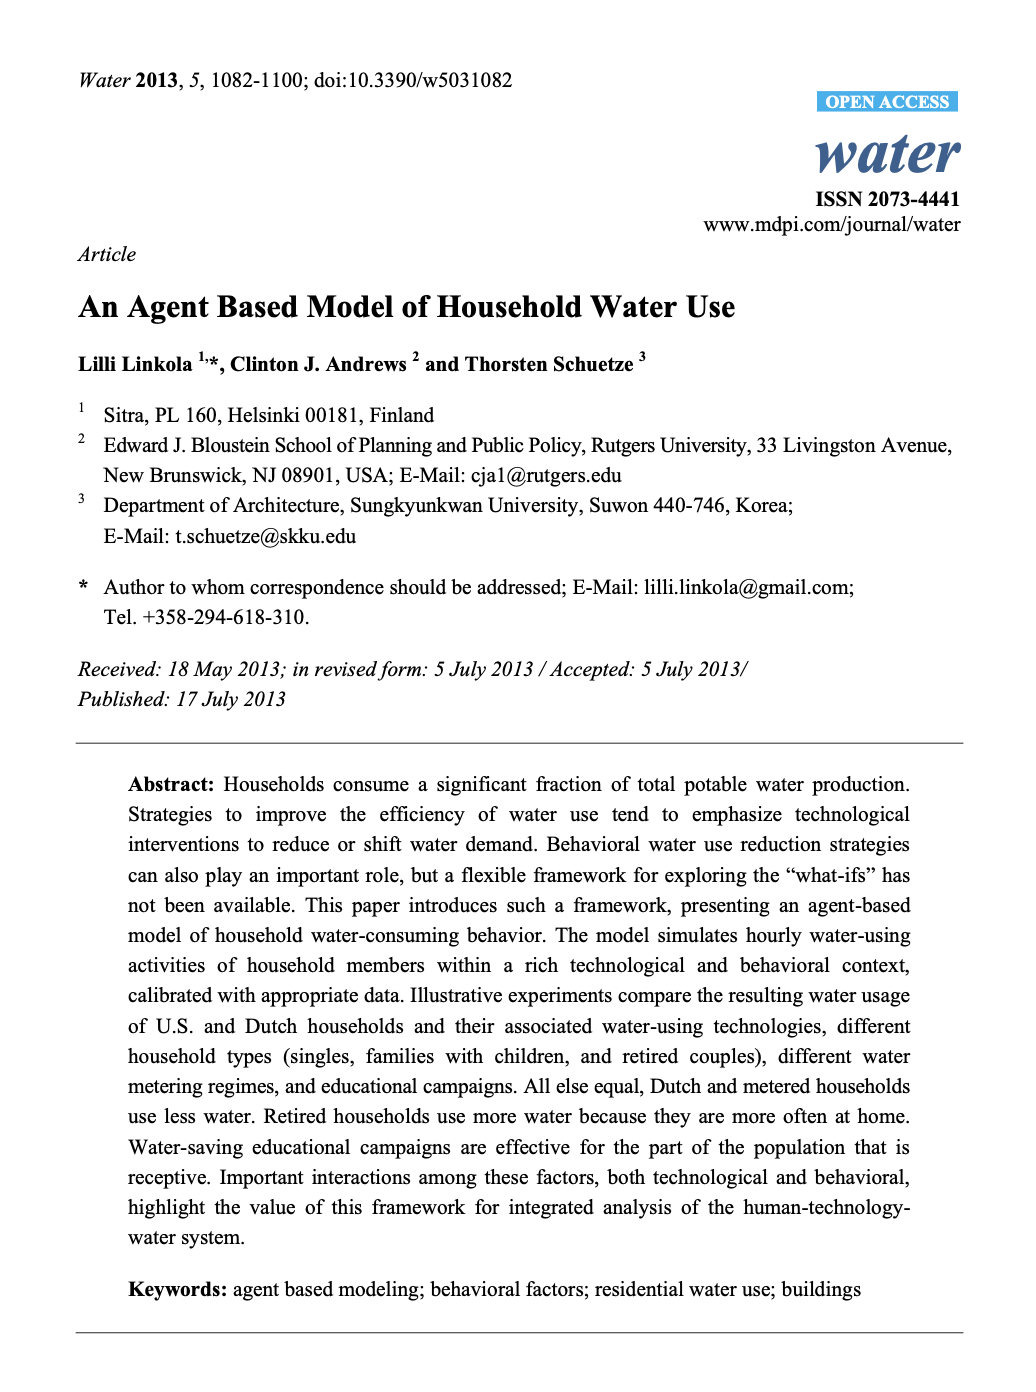 An Agent Based Model of Household Water Use